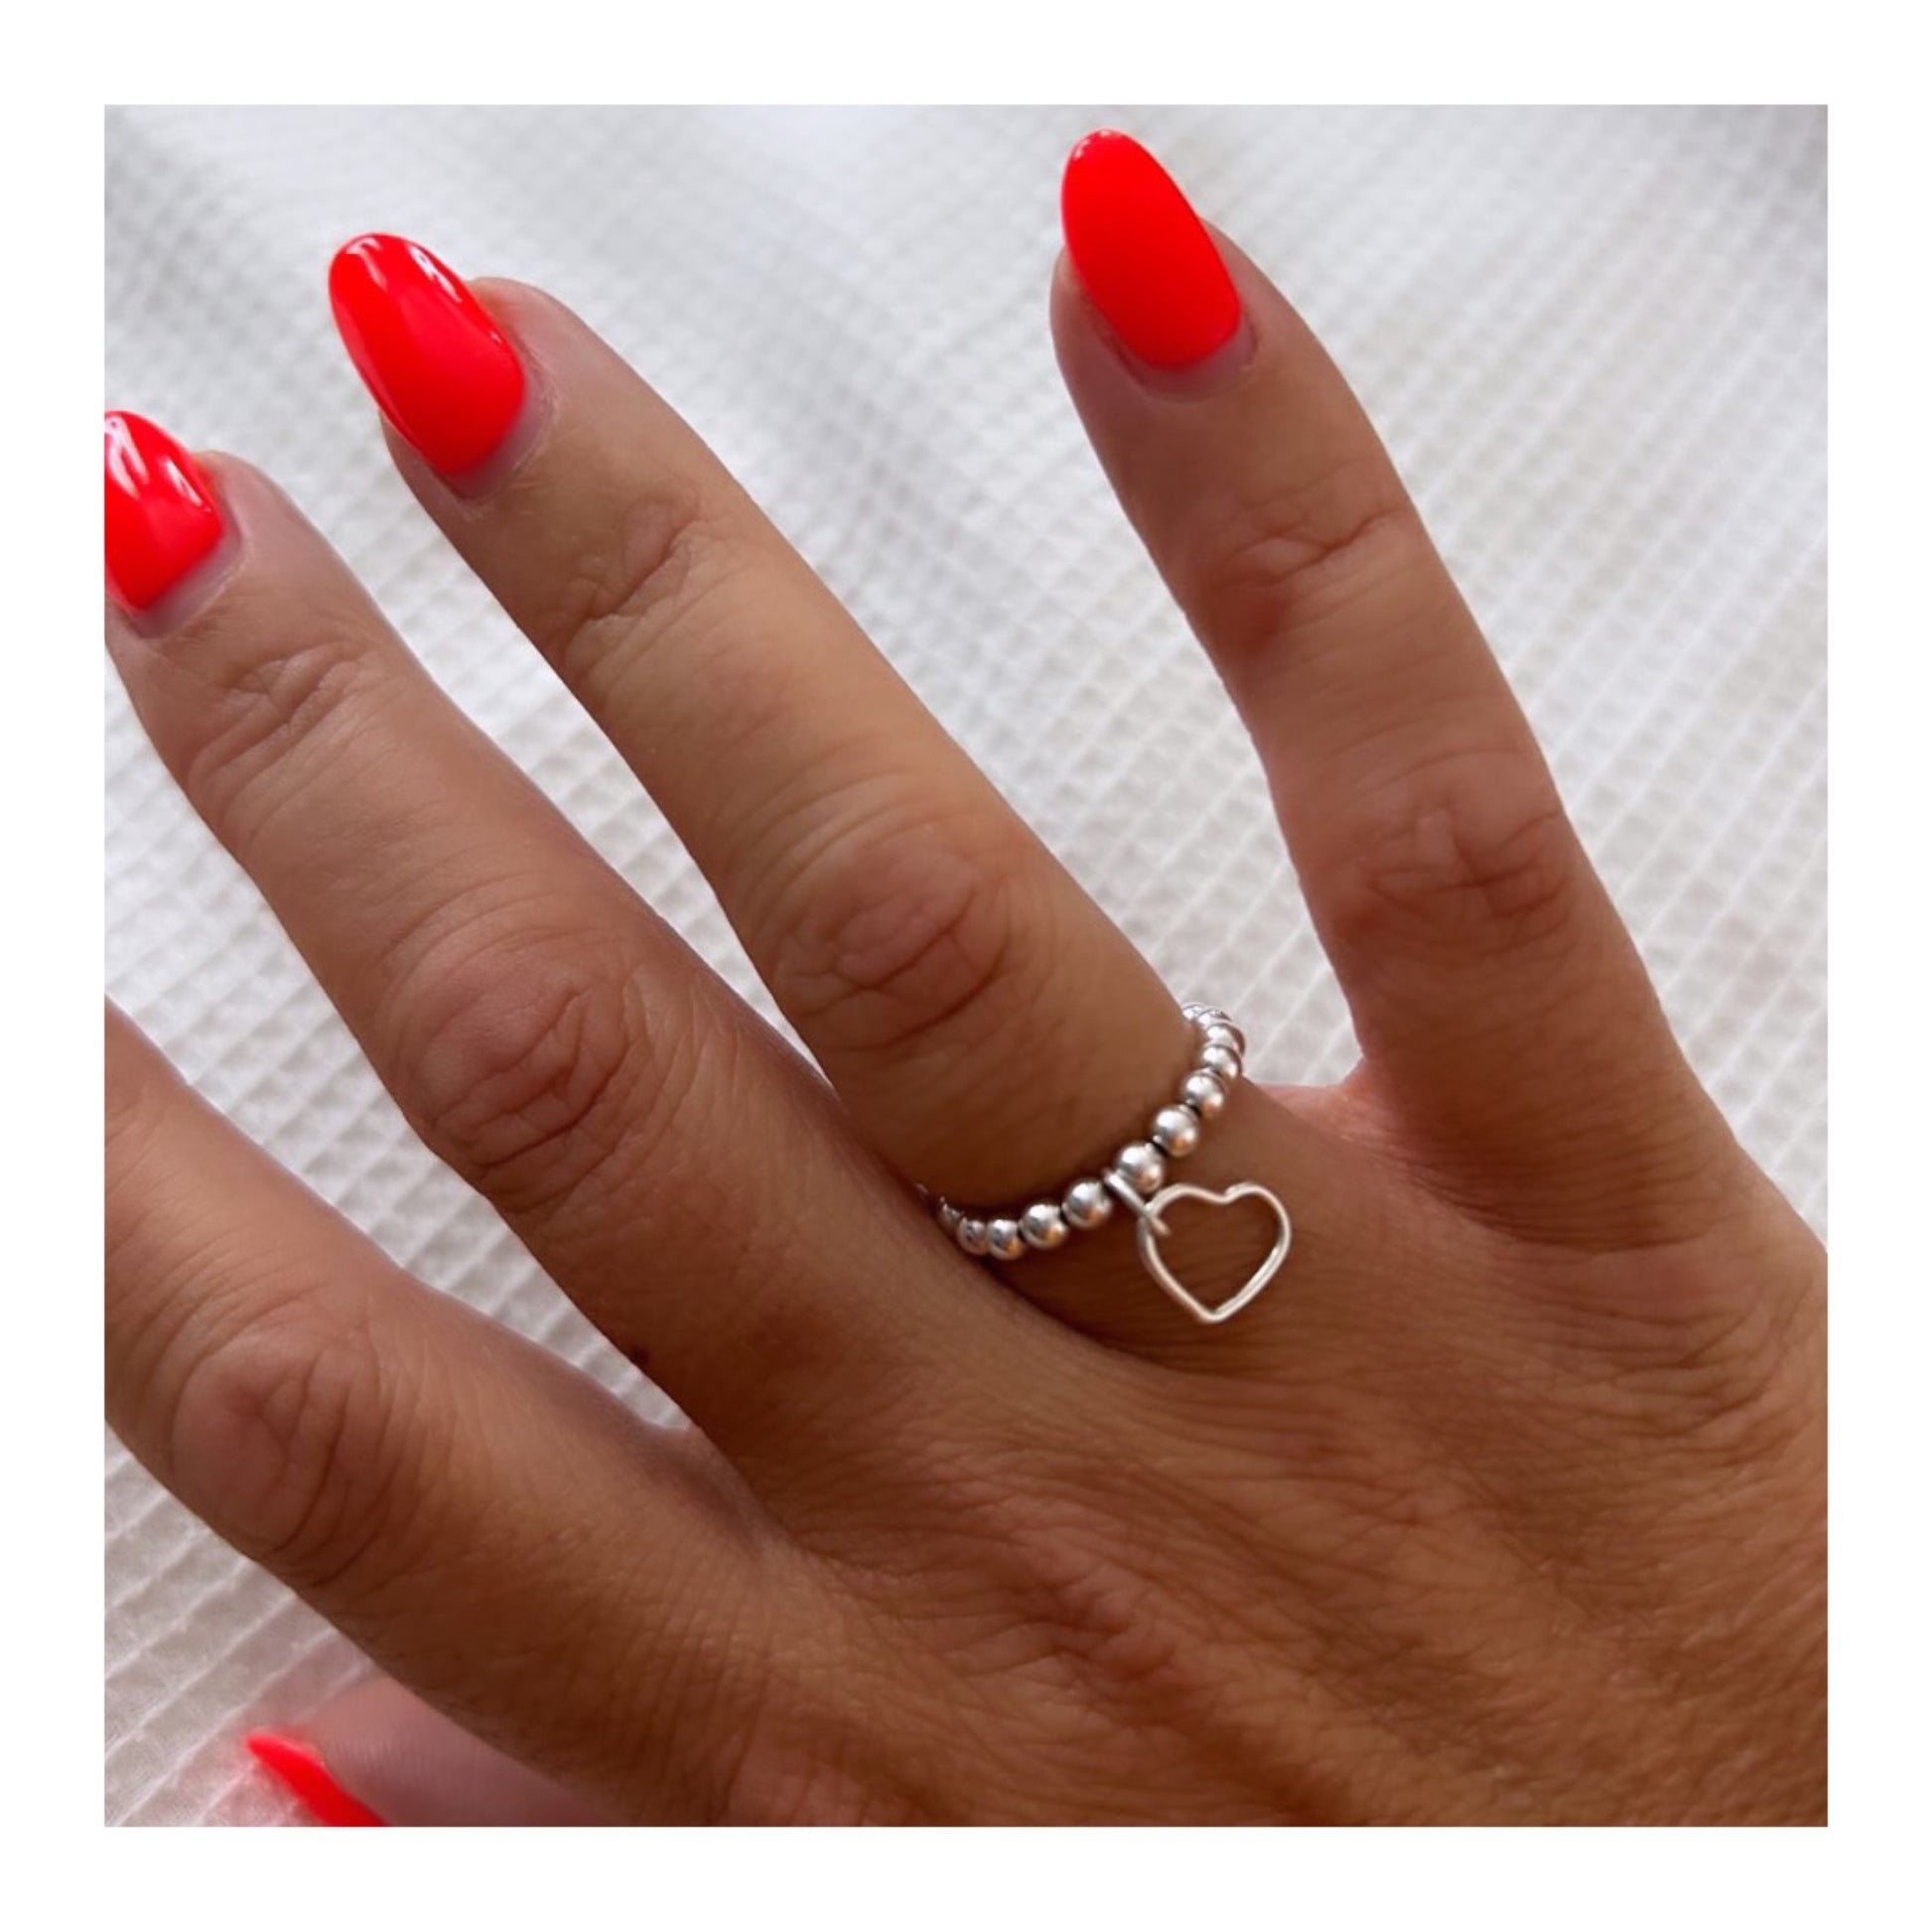 Woman wearing silver handmade stacking ring with heart